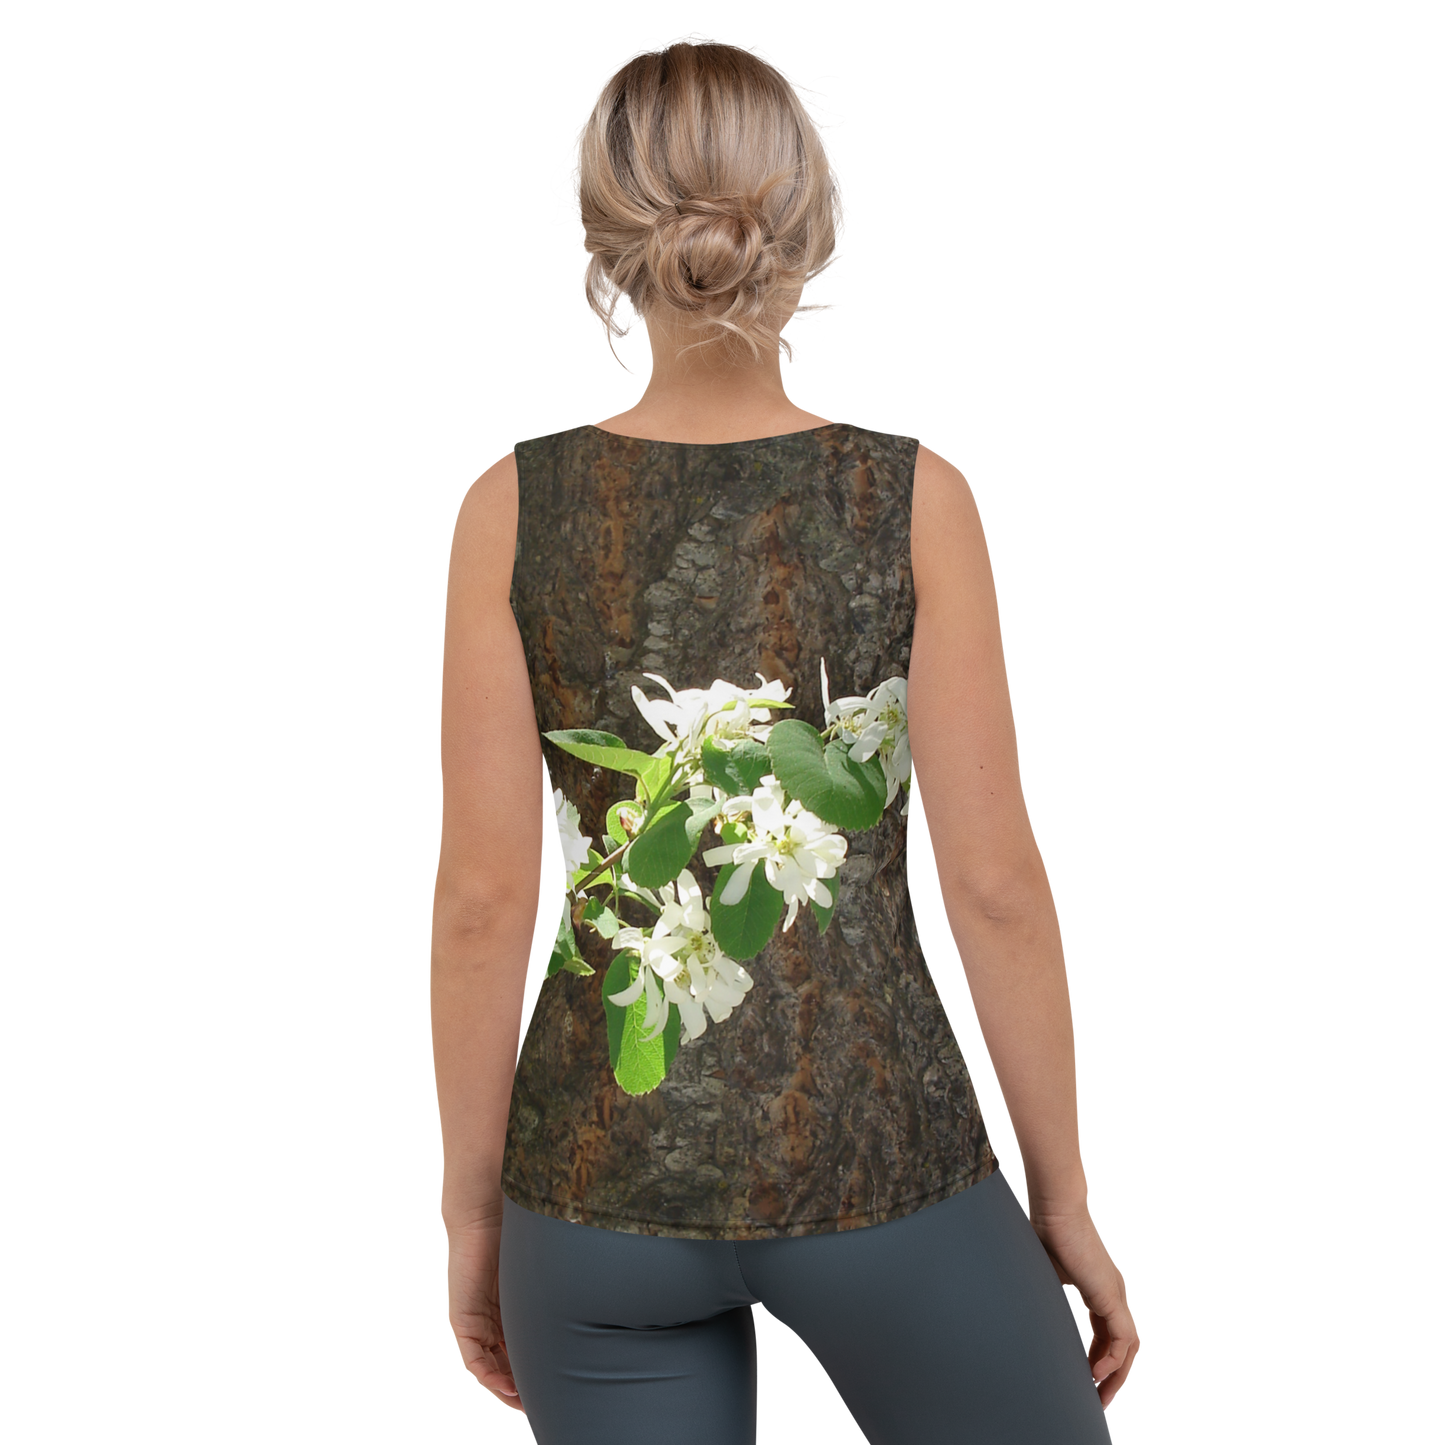 The EARTH LOVE Collection - "Bark & Blossom Bliss" Design Tank Top